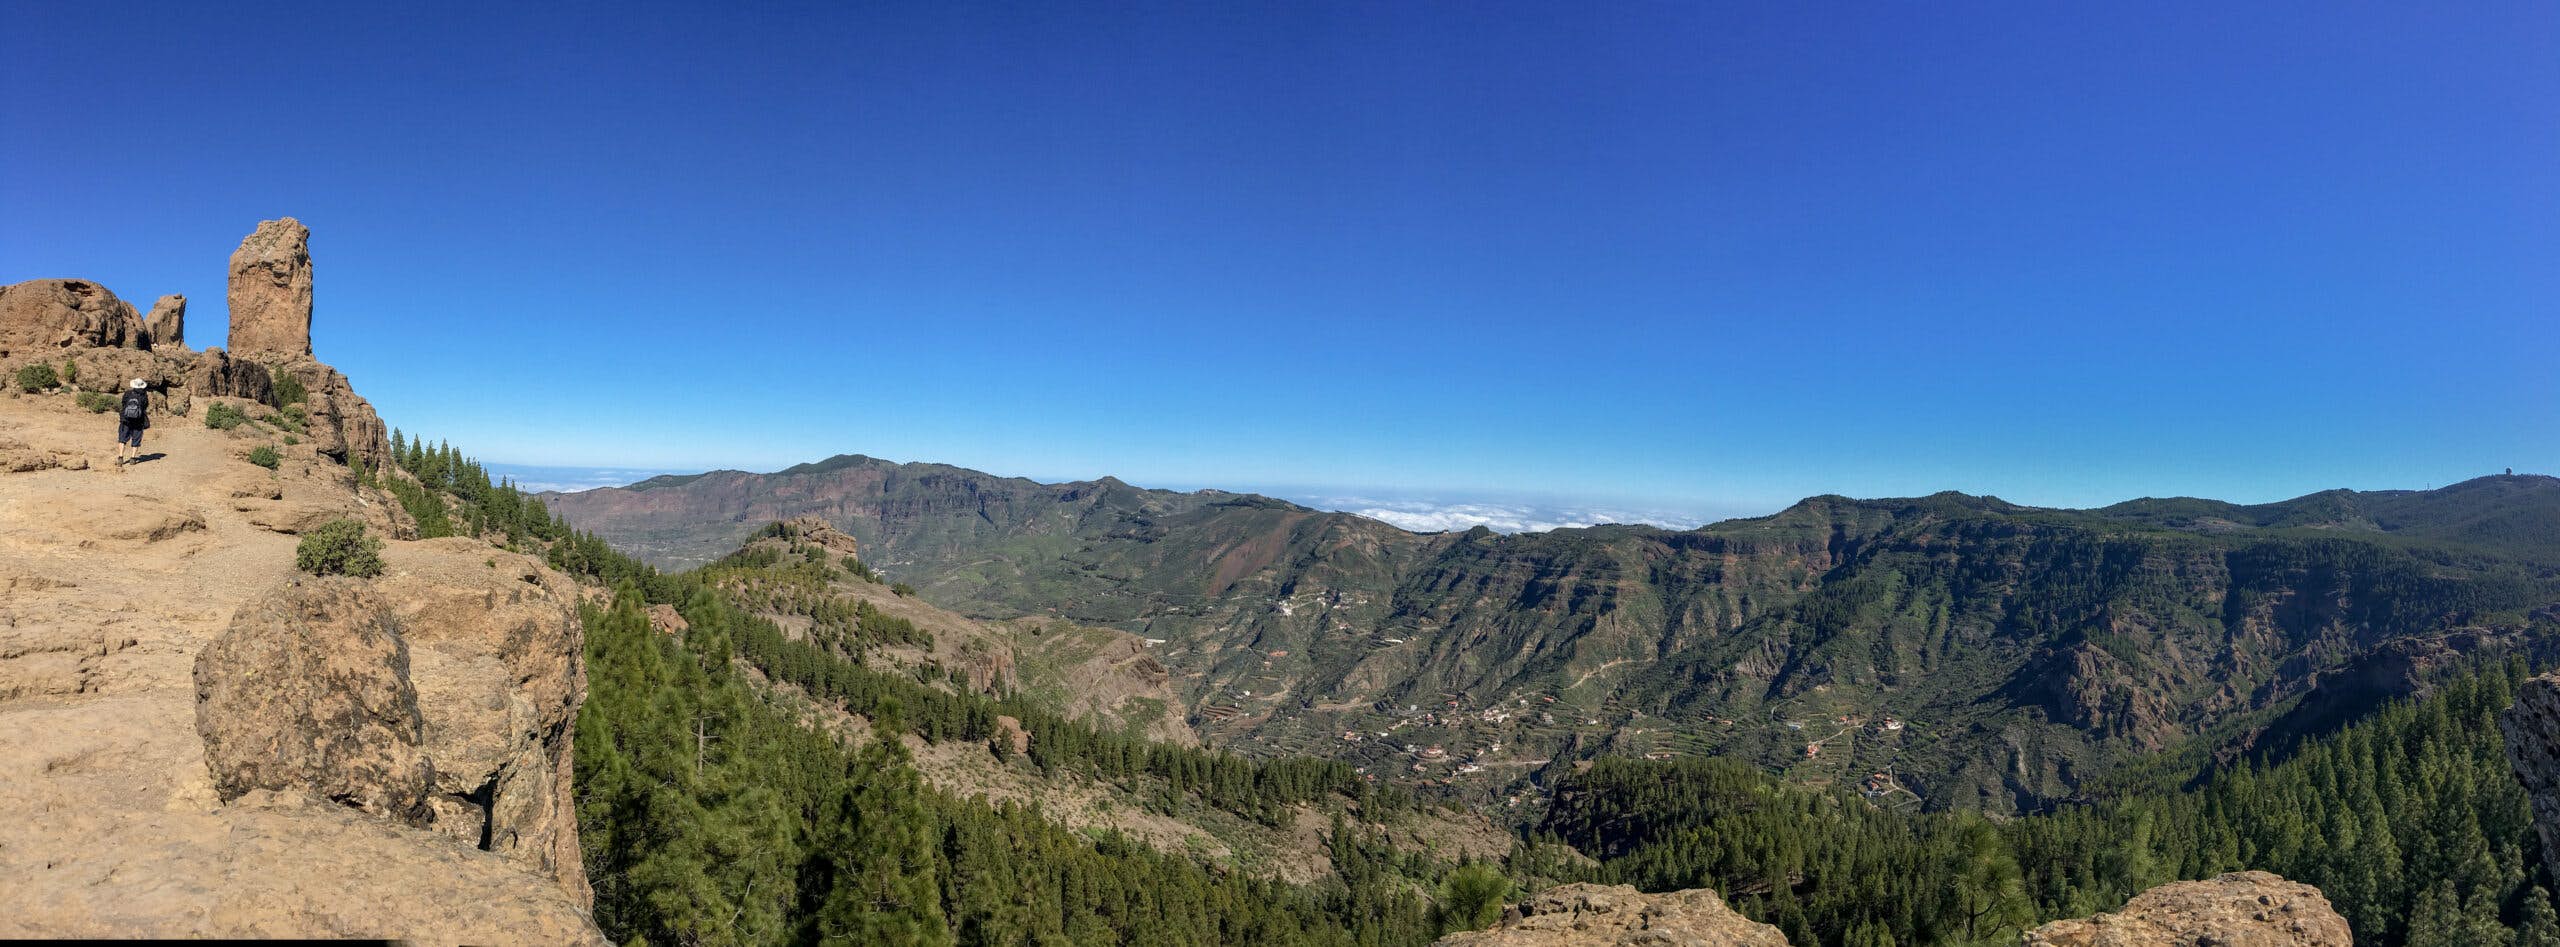 View from the Roque Nublo plateau to the surrounding mountain ranges